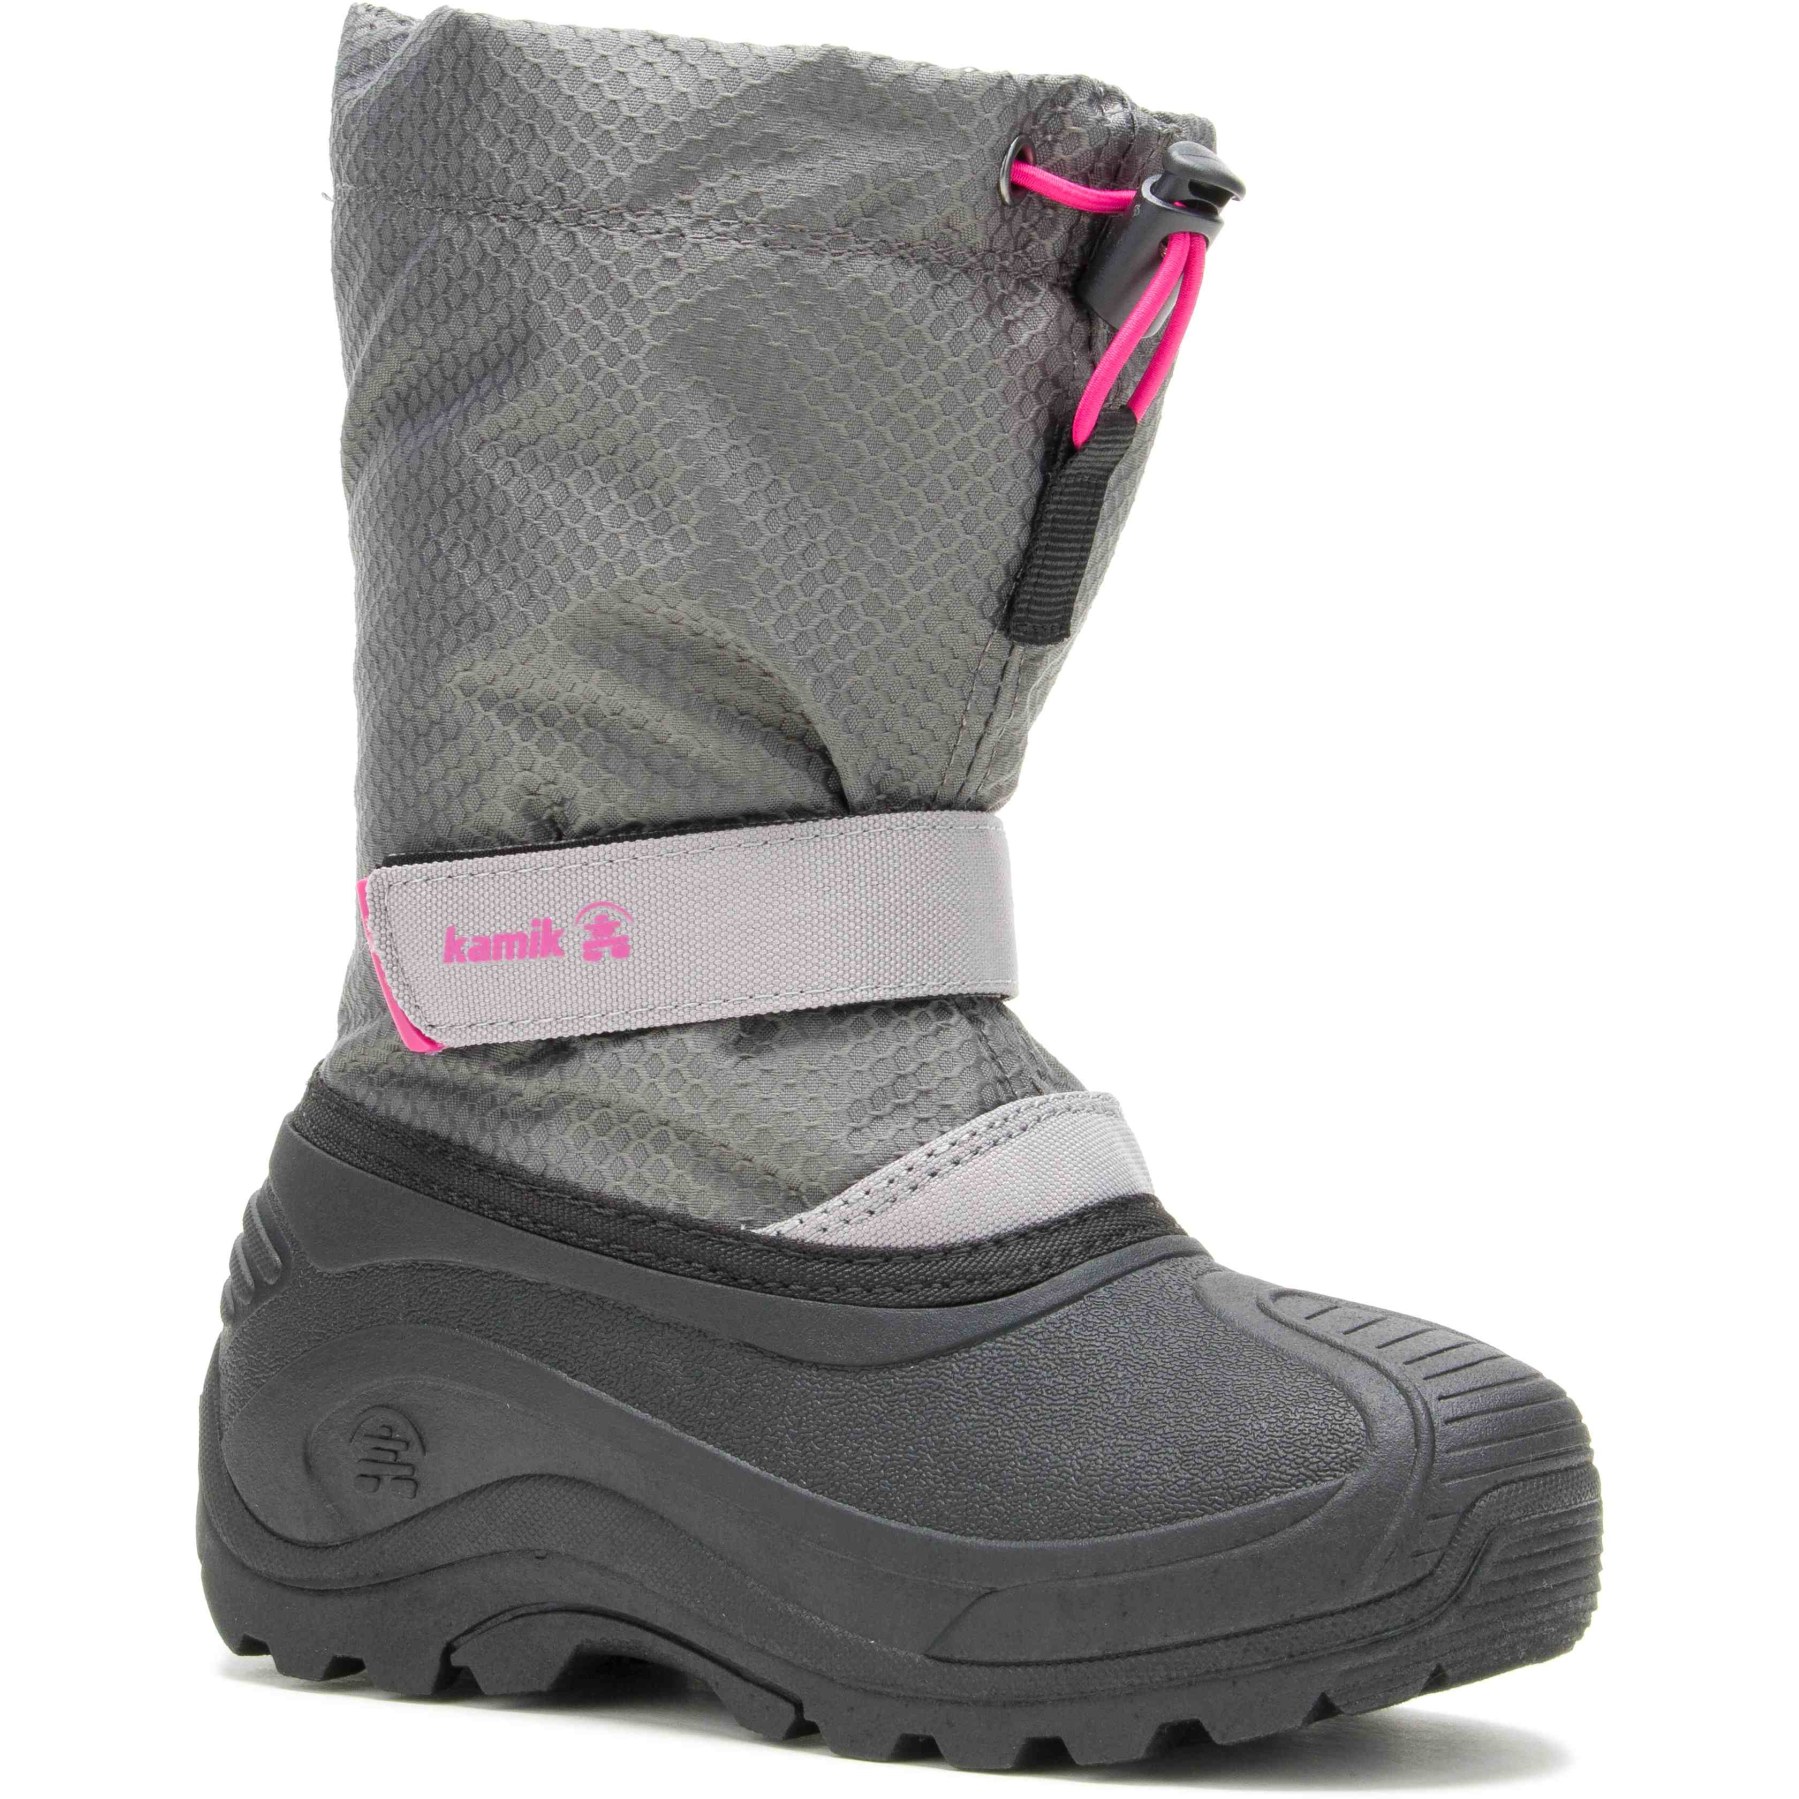 Image of Kamik Finley 2 Kids Winter Boots - Grey/Pink (Size 32-39)